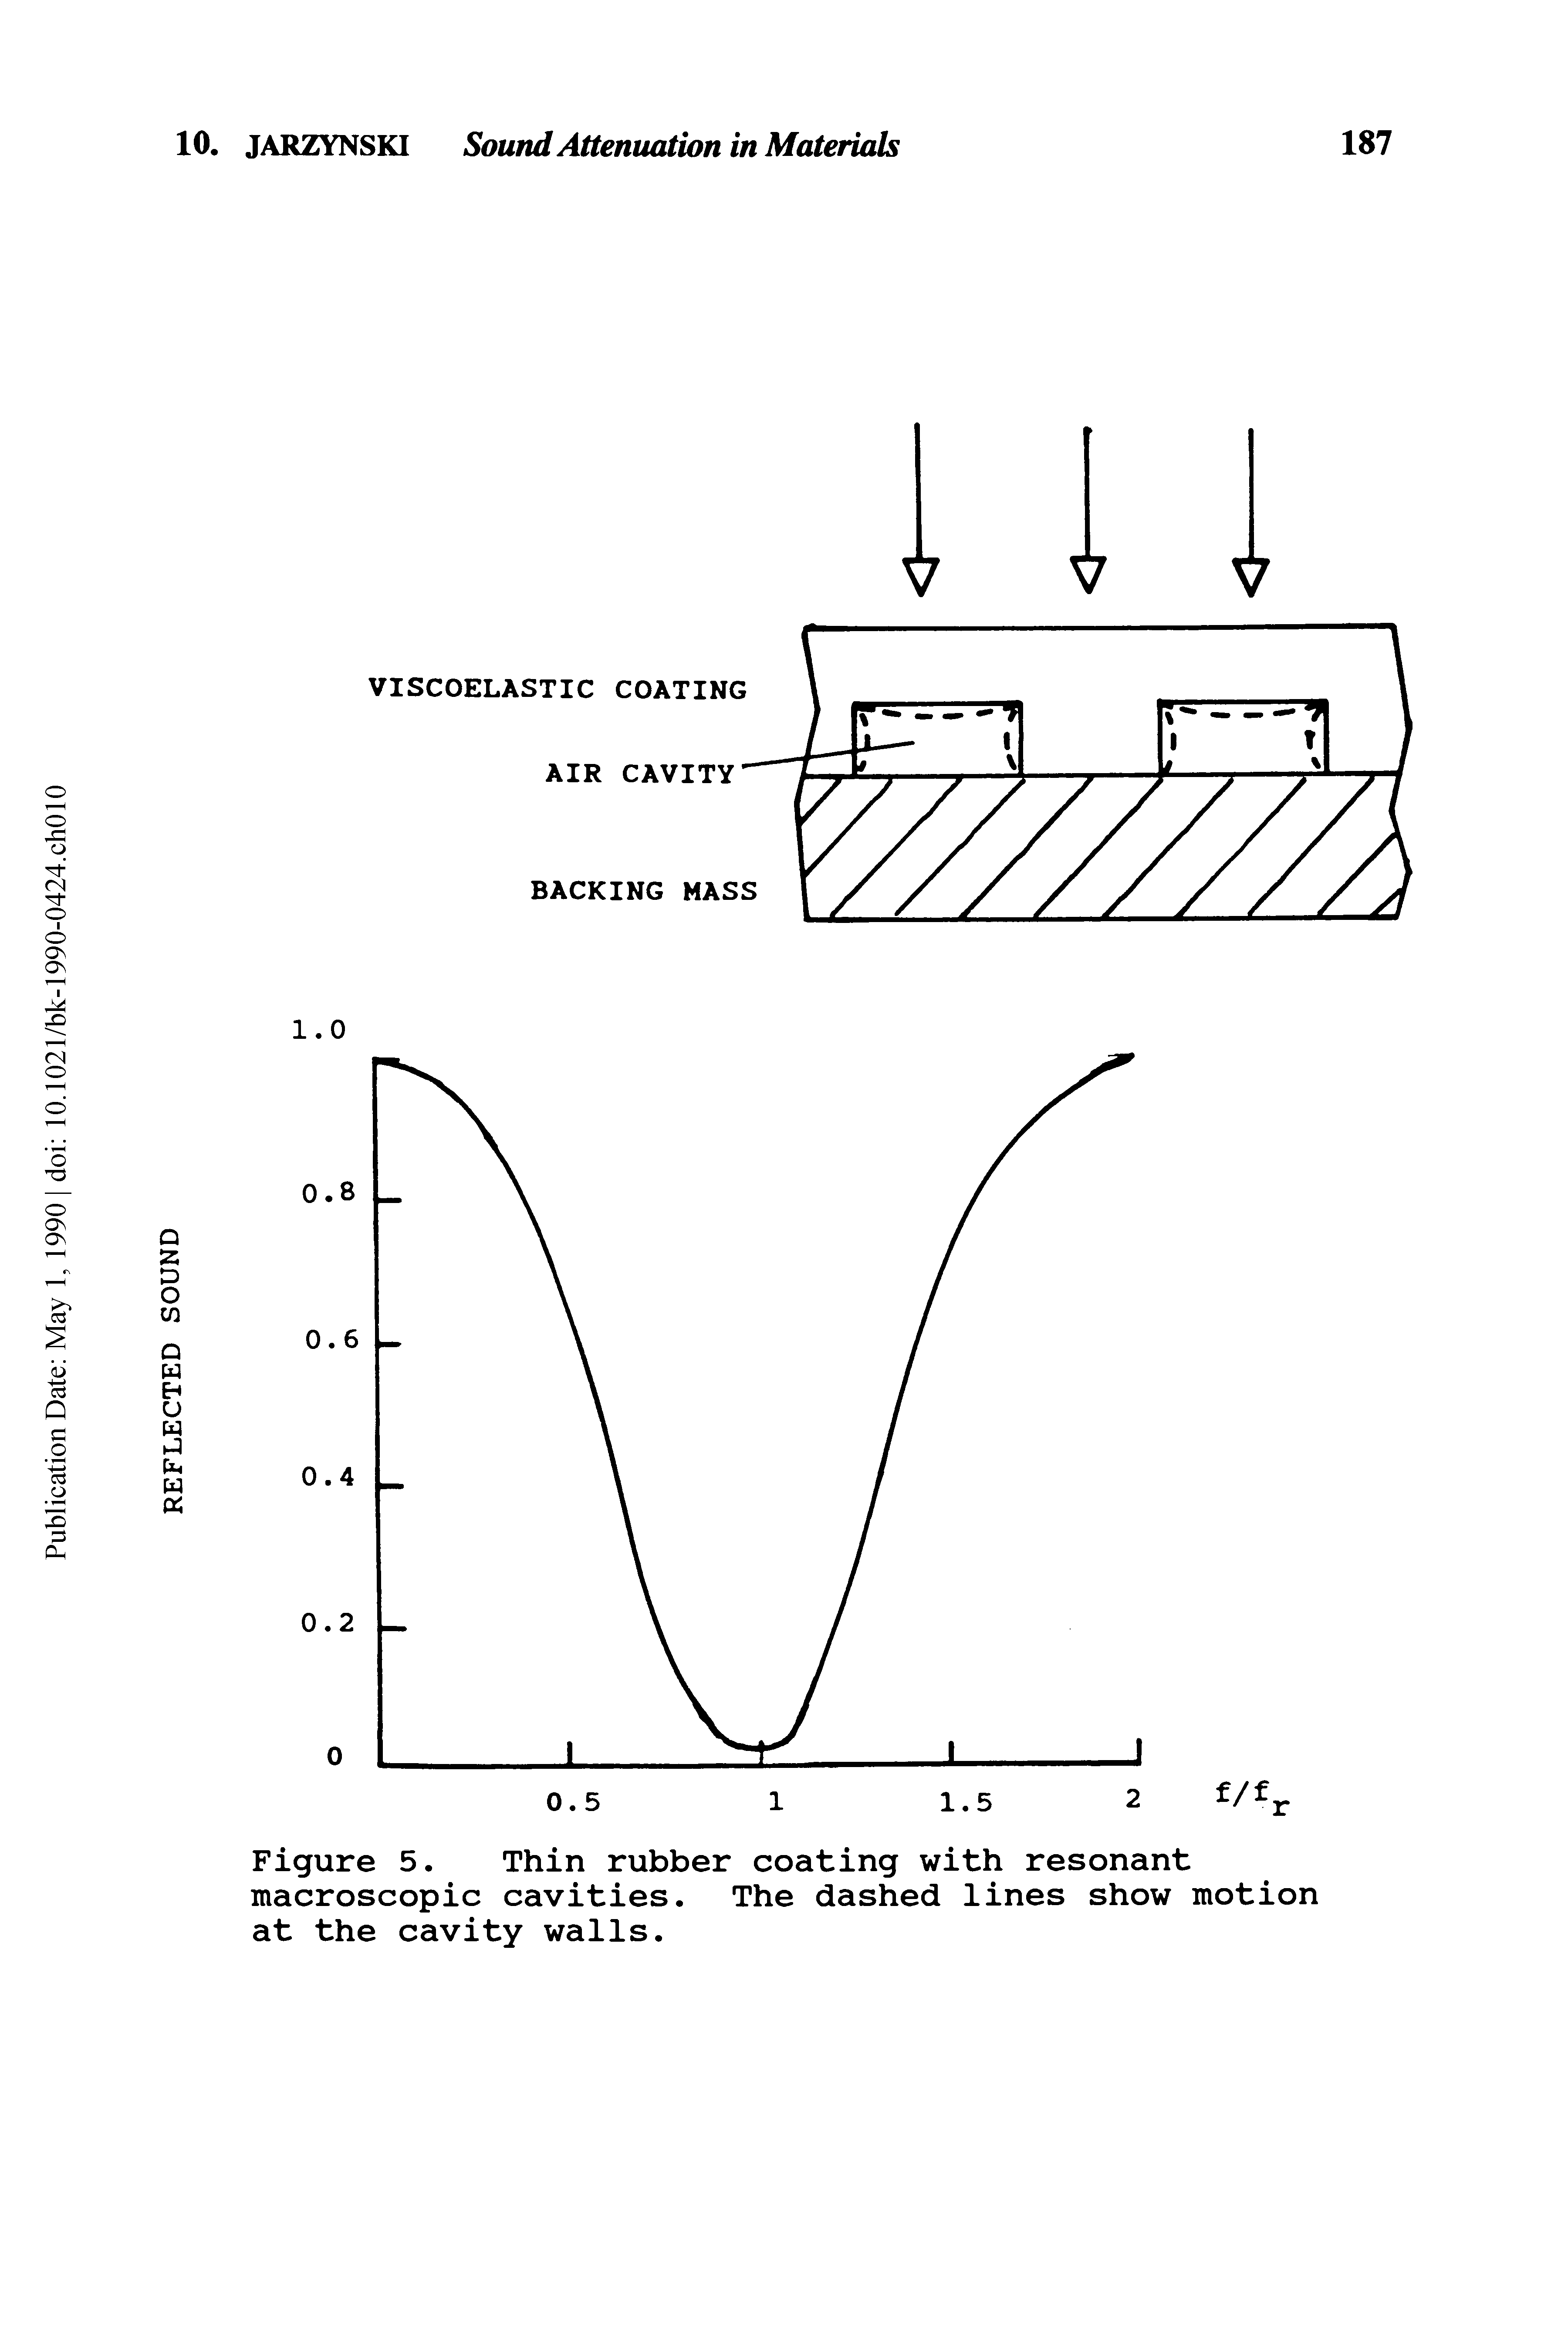 Figure 5. Thin rubber coating with resonant macroscopic cavities. The dashed lines show motion at the cavity walls.